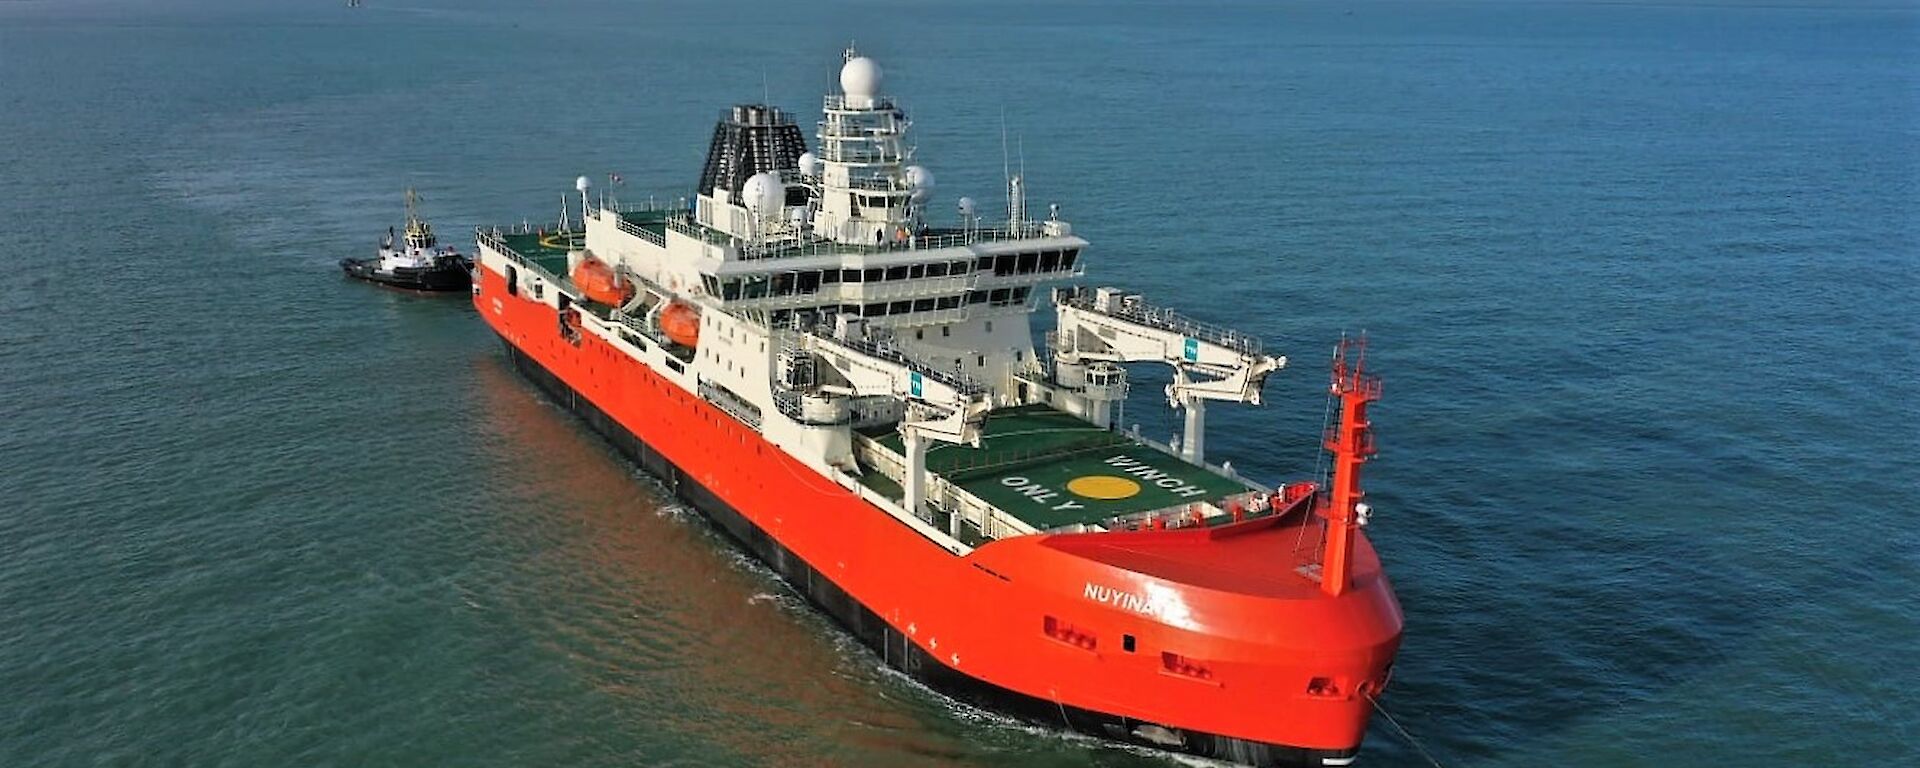 Australia’s newly completed icebreaker RSV Nuyina embarks on sea trials